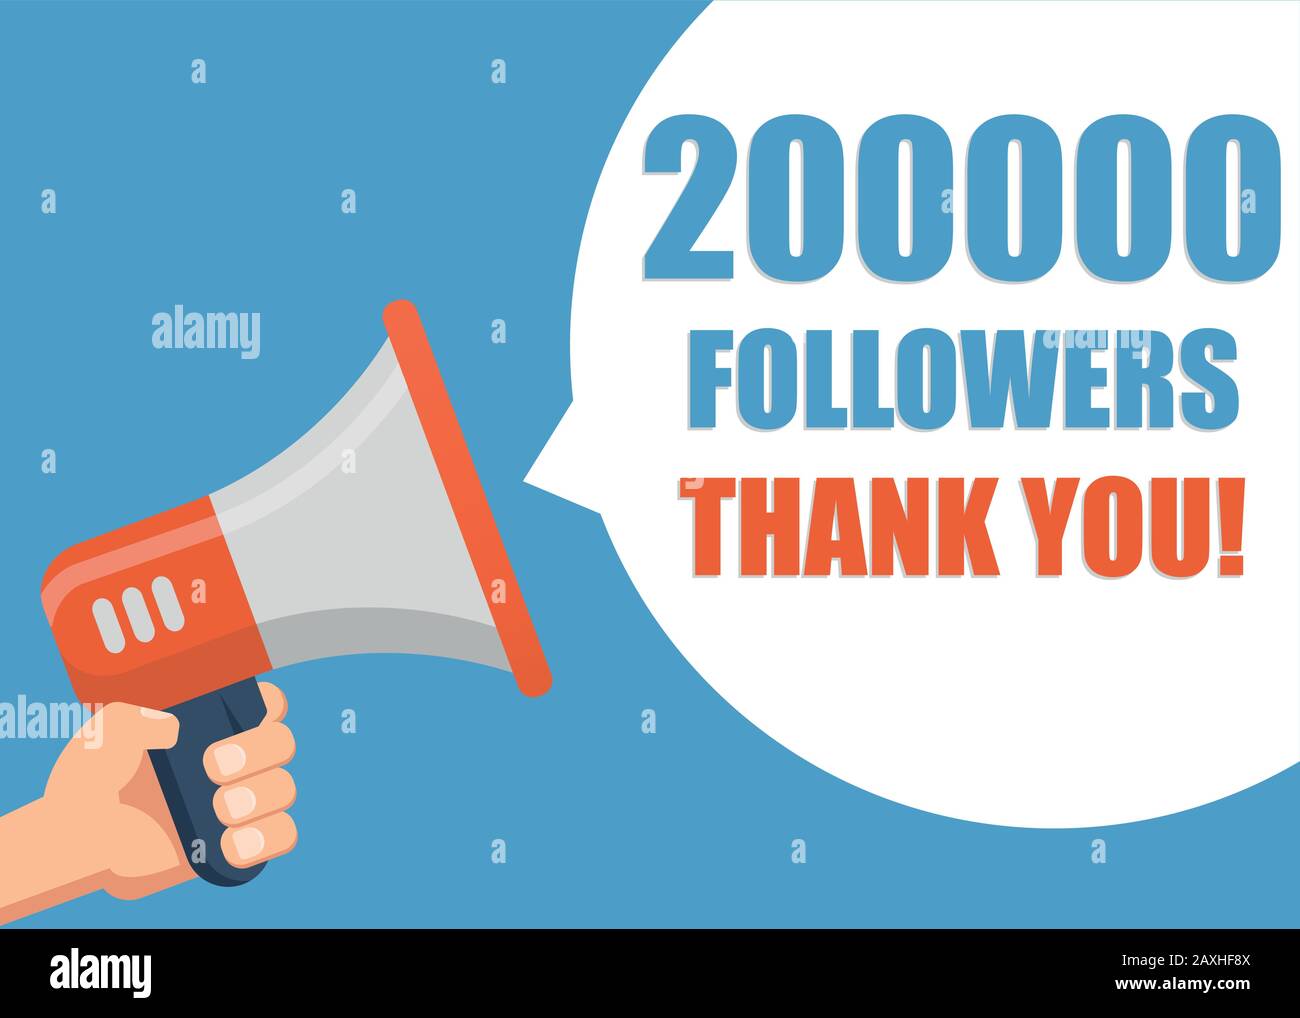 200000 Followers Thank You Hand holding megaphone Stock Vector